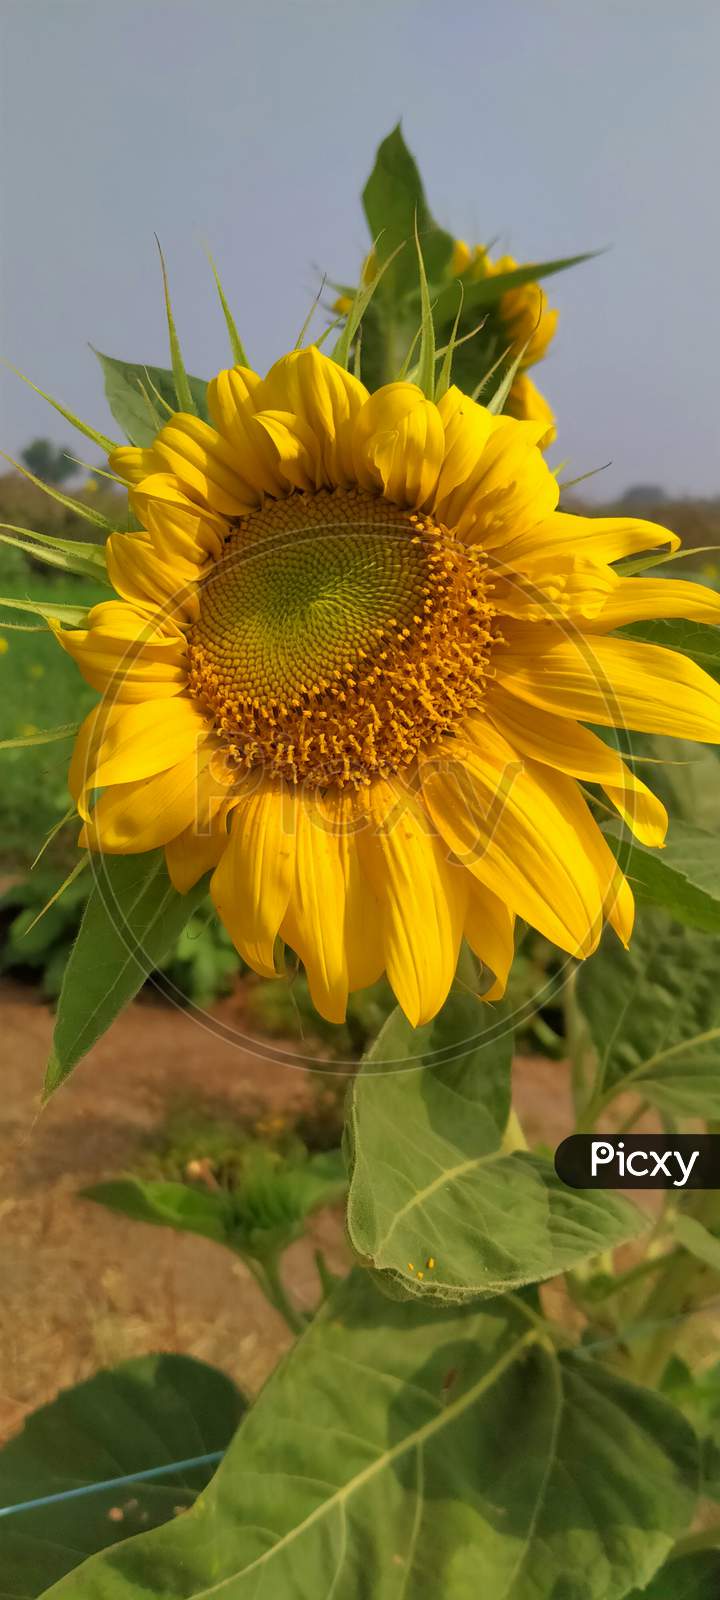 Sunflower natural background, Sunflower blooming, Sunflower oil improves skin health and promote cell regeneration, India